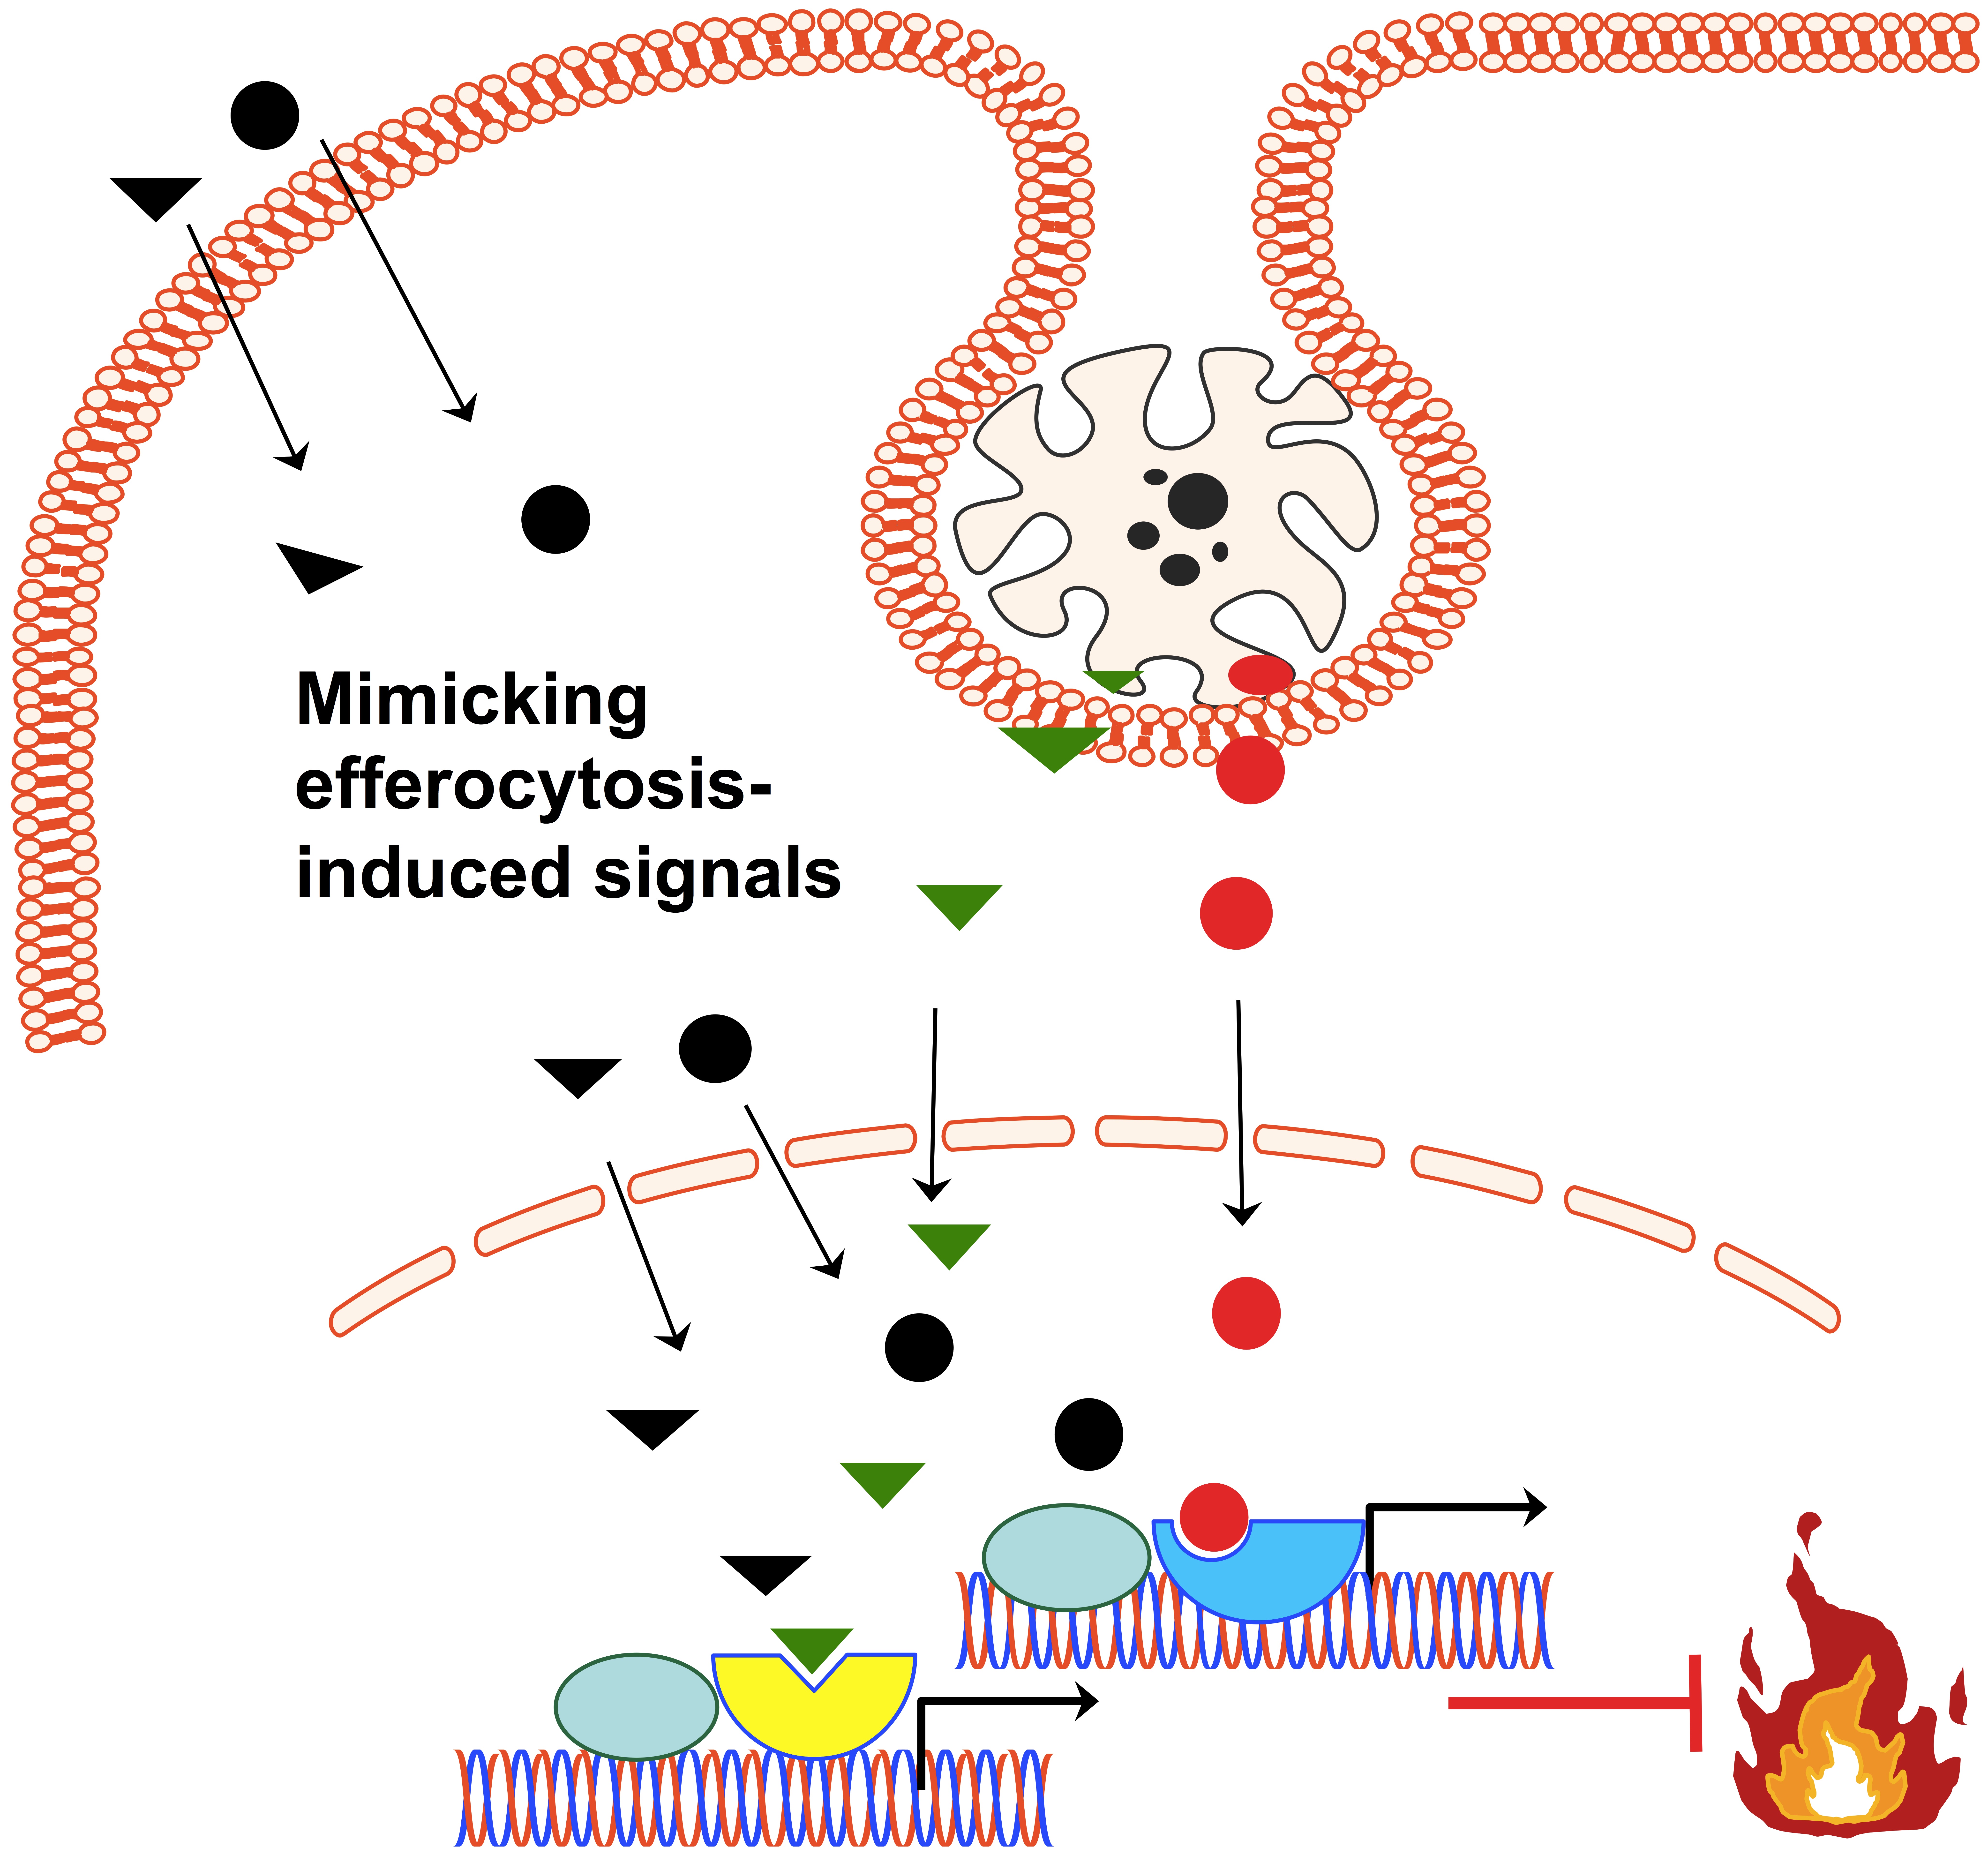 Image of a body's cell representing with the words "mimicking efferocytosis-induced signals" showing the treatment of an inflammatory disease